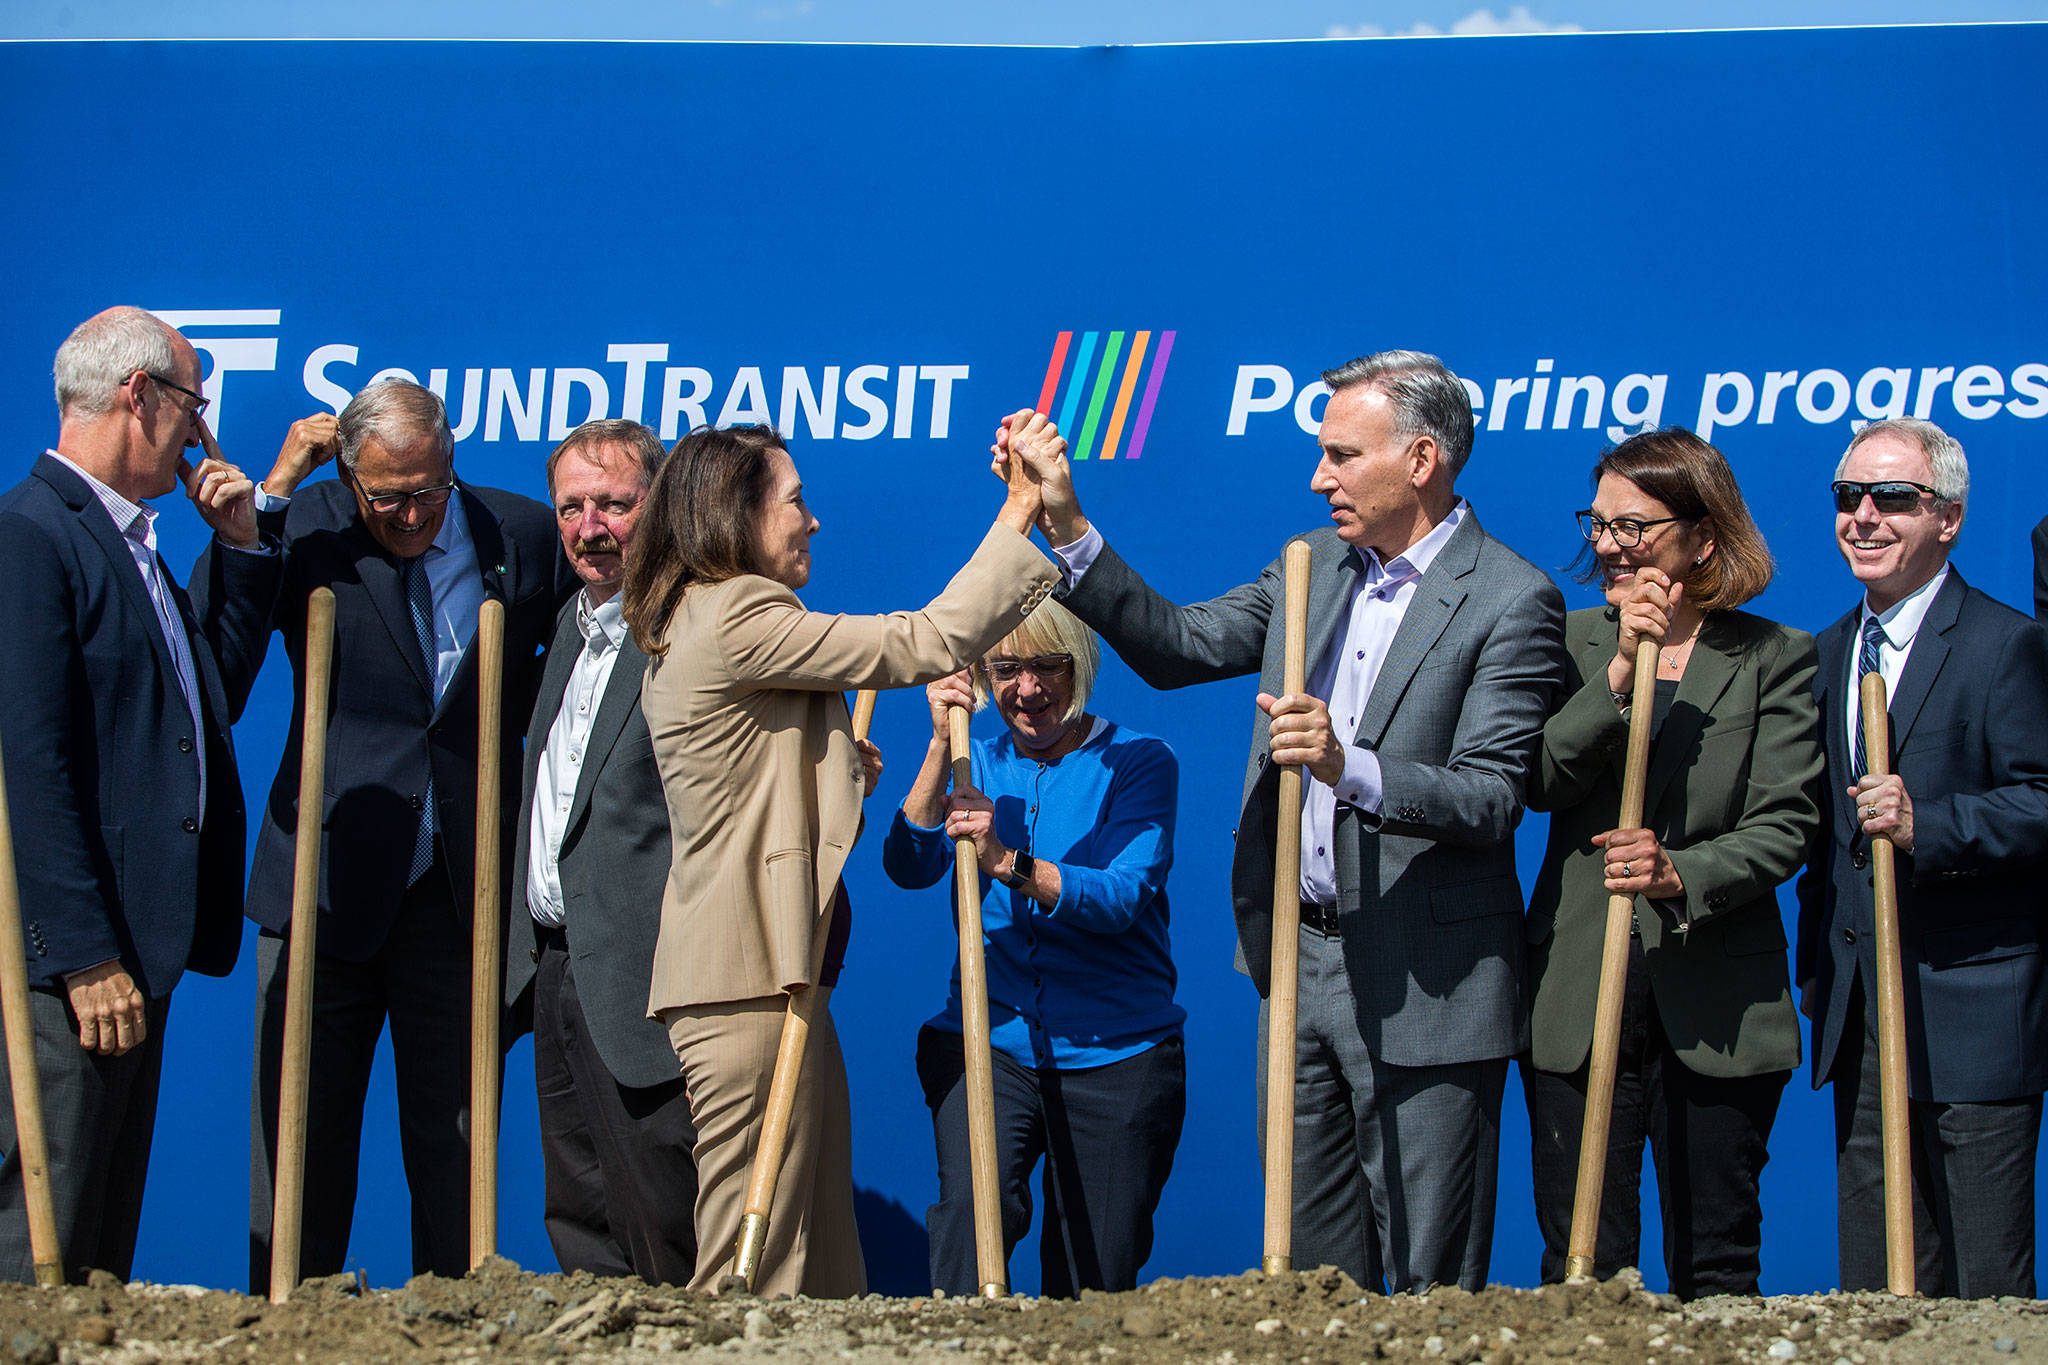 U.S. Sen. Maria Cantwell (fourth from left) high-fives King County Executive Dow Constantine after the Link light rail extension groundbreaking on Tuesday in Lynnwood. With them are, from left, U.S. Rep. Rick Larsen, Gov. Jay Inslee, Snohomish County Executive Dave Somers, U.S. Sen. Patty Murray, U.S. Rep. Suzan DelBene and Snohomish County Councilman Terry Ryan. (Olivia Vanni / The Herald)